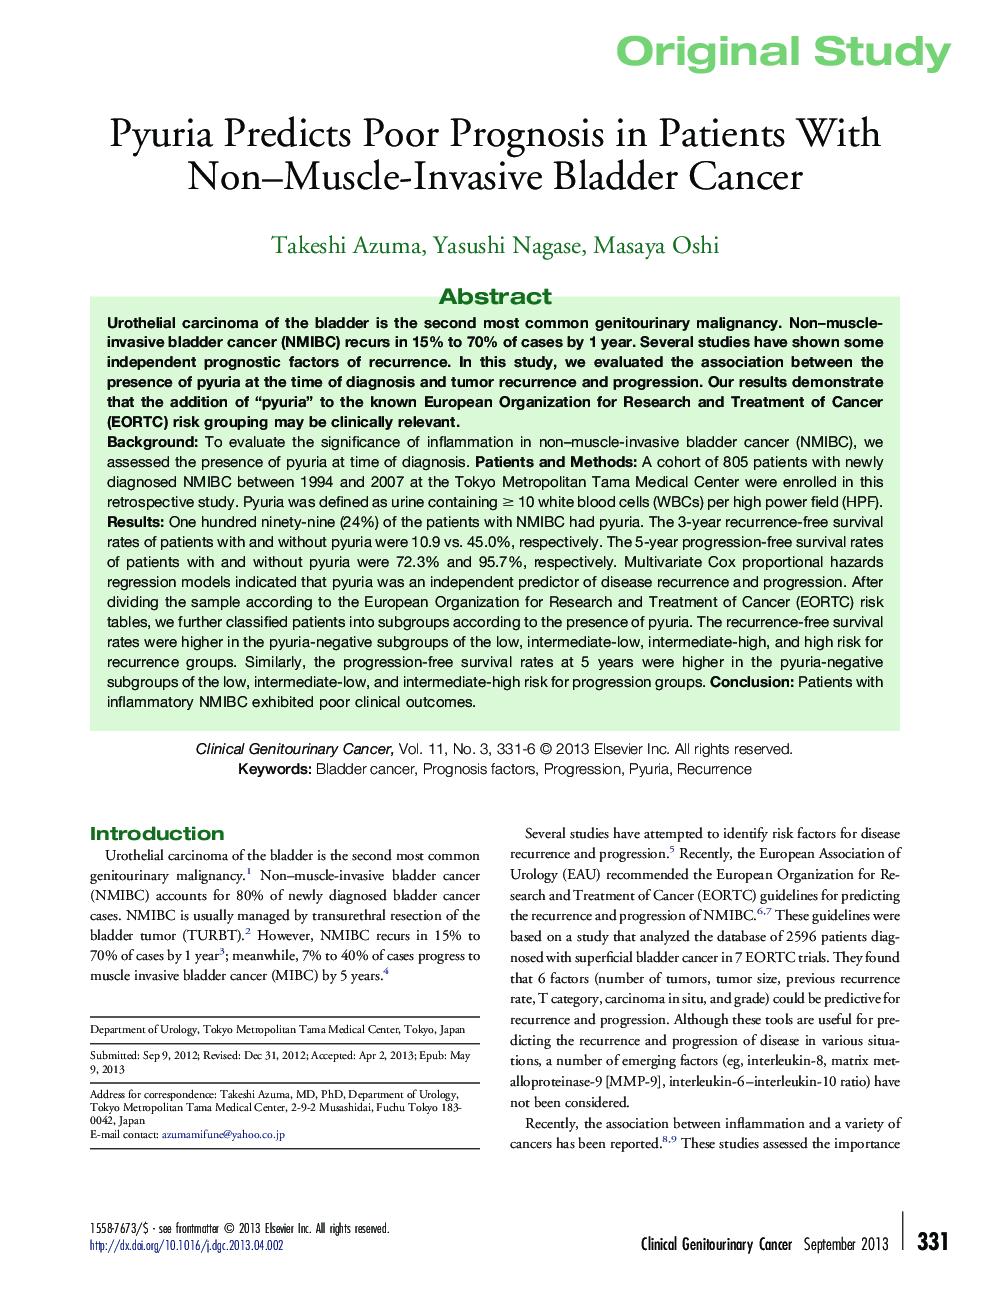 Pyuria Predicts Poor Prognosis in Patients With Non–Muscle-Invasive Bladder Cancer